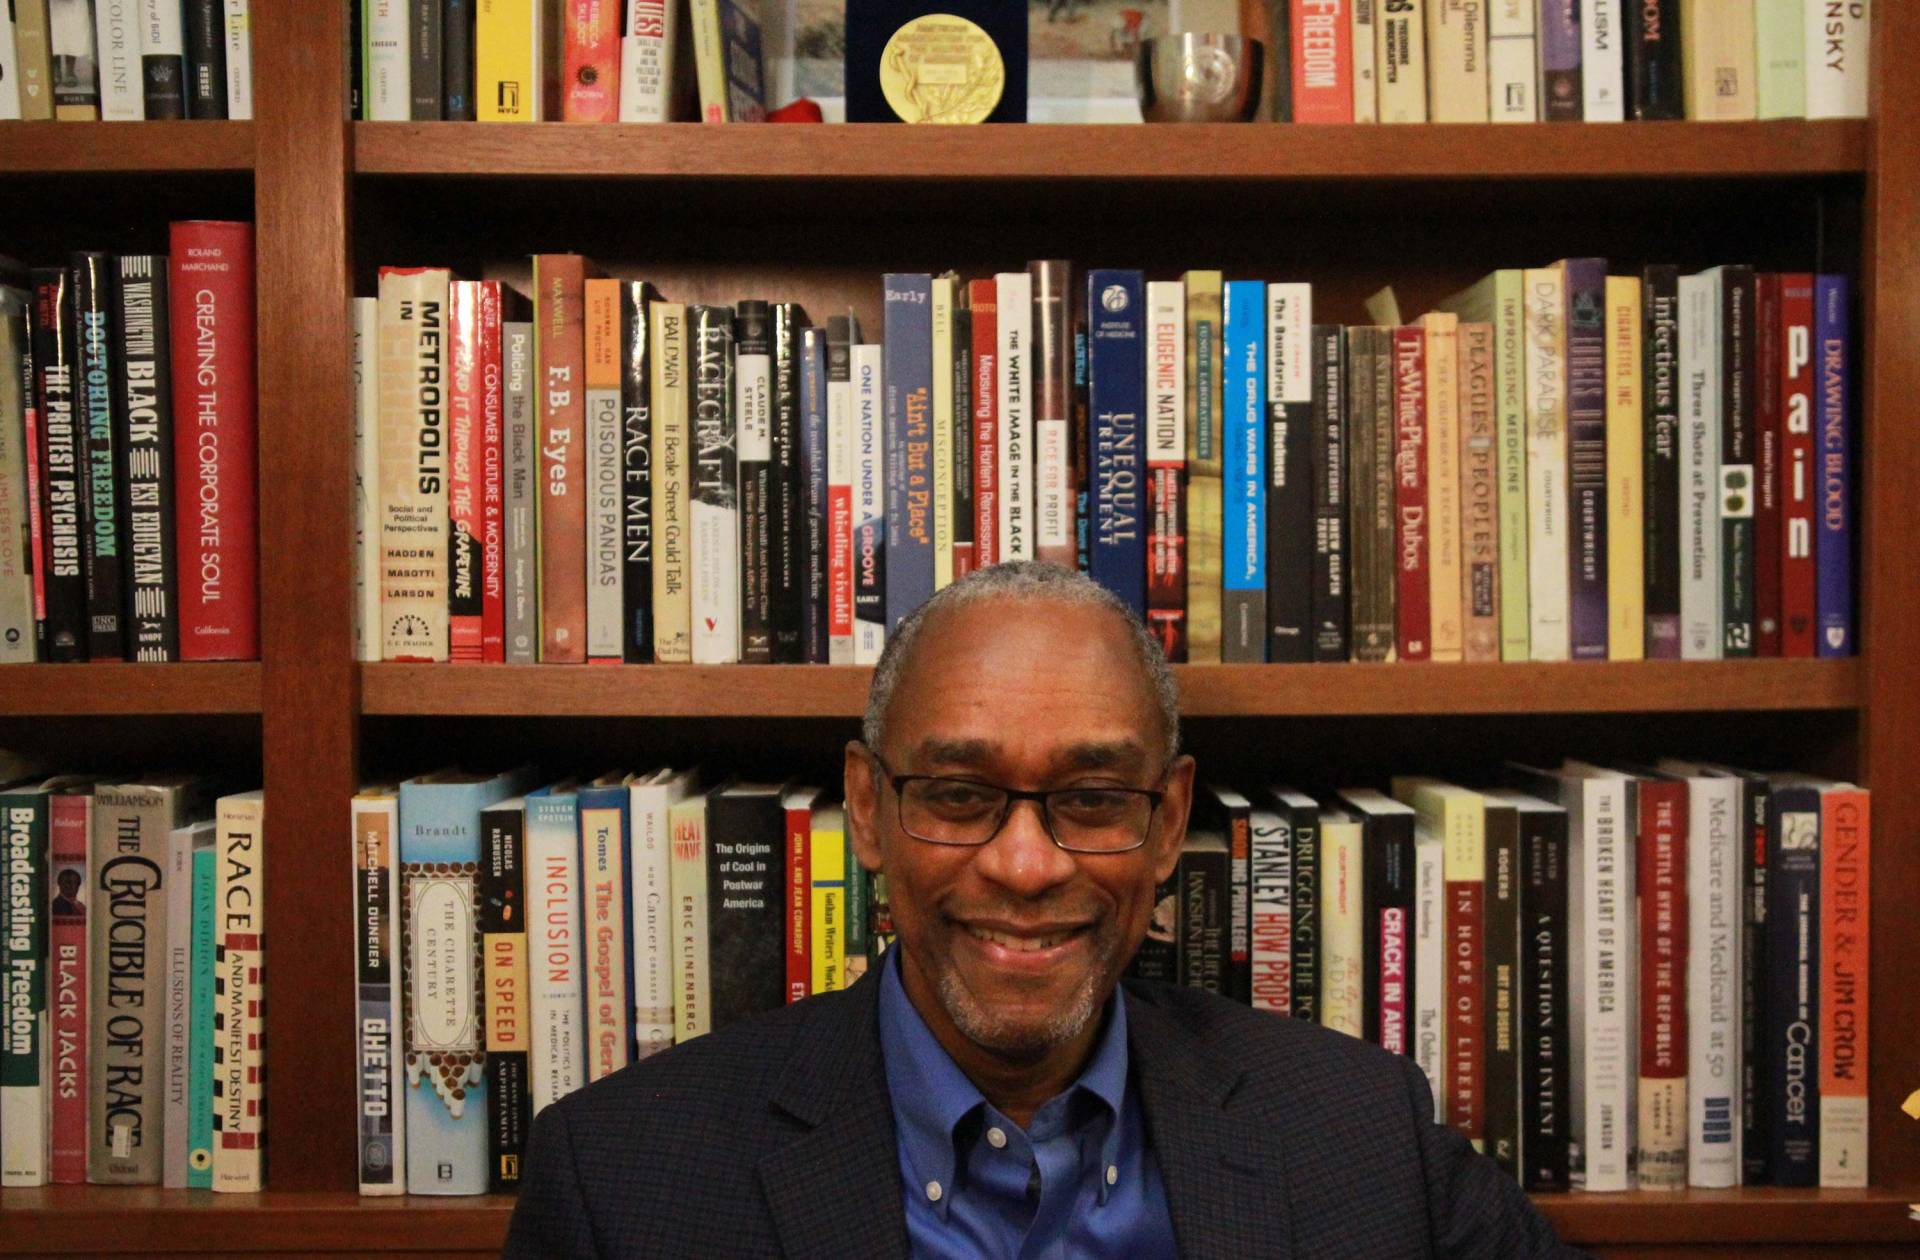 Keith Wailoo in front of his bookshelves